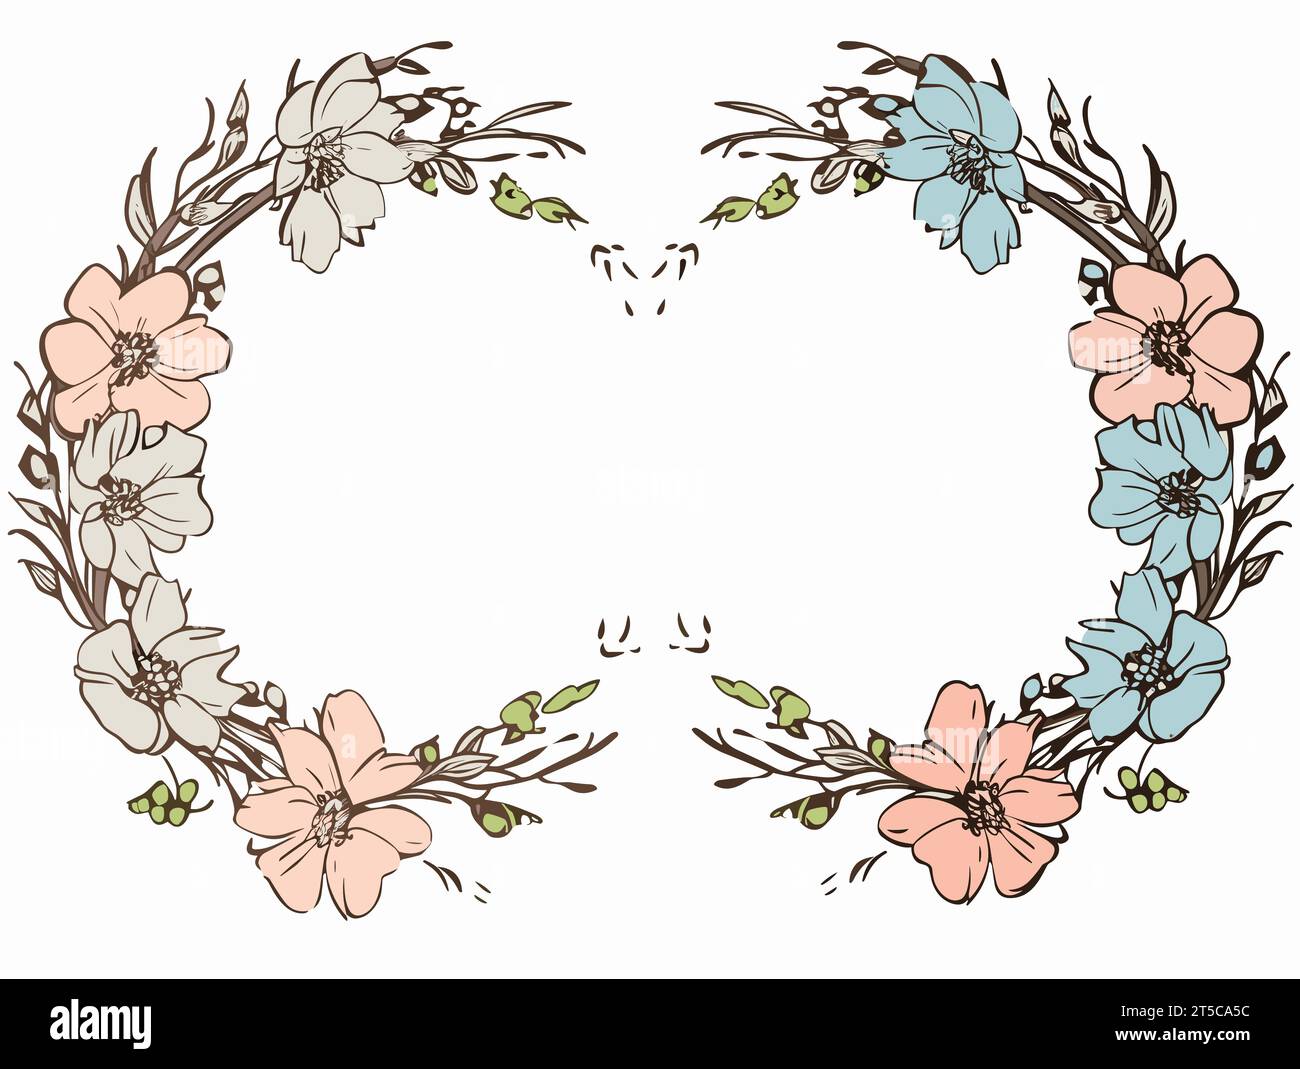 Drawing of flower wreaths with neutral flowers and leaves illustration separated, sweeping overdrawn lines. Stock Vector